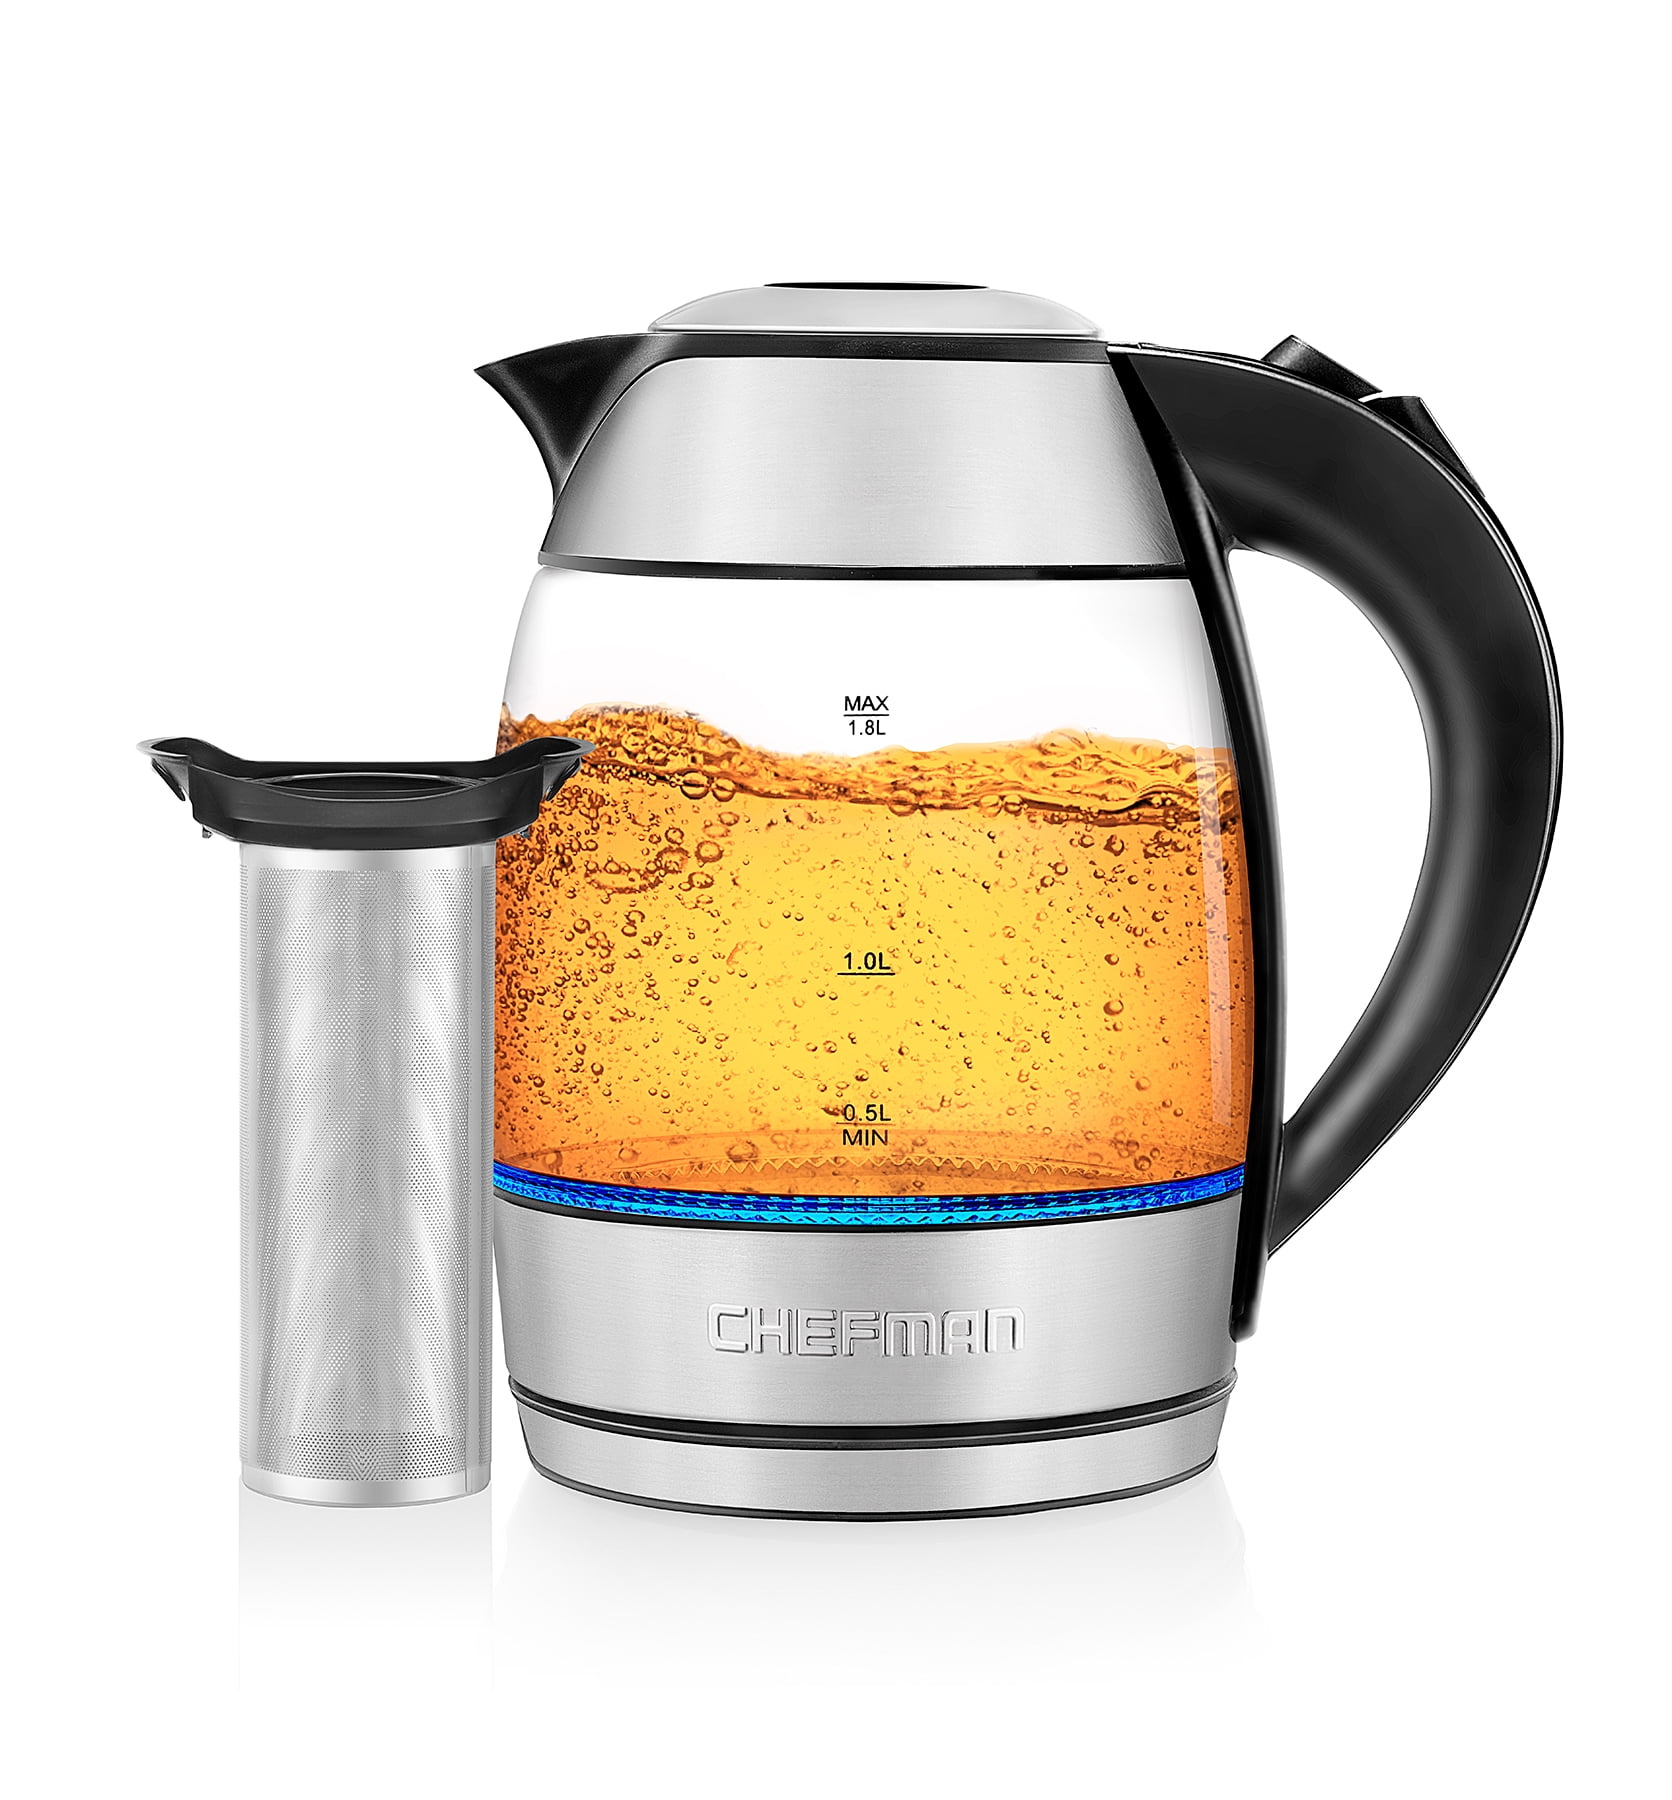 Chefman Digital Electric Glass Kettle, No.1 Kettle Manufacturer, Removable  Tea Infuser Included & Electric Kettle with Temperature Control, 5 Presets